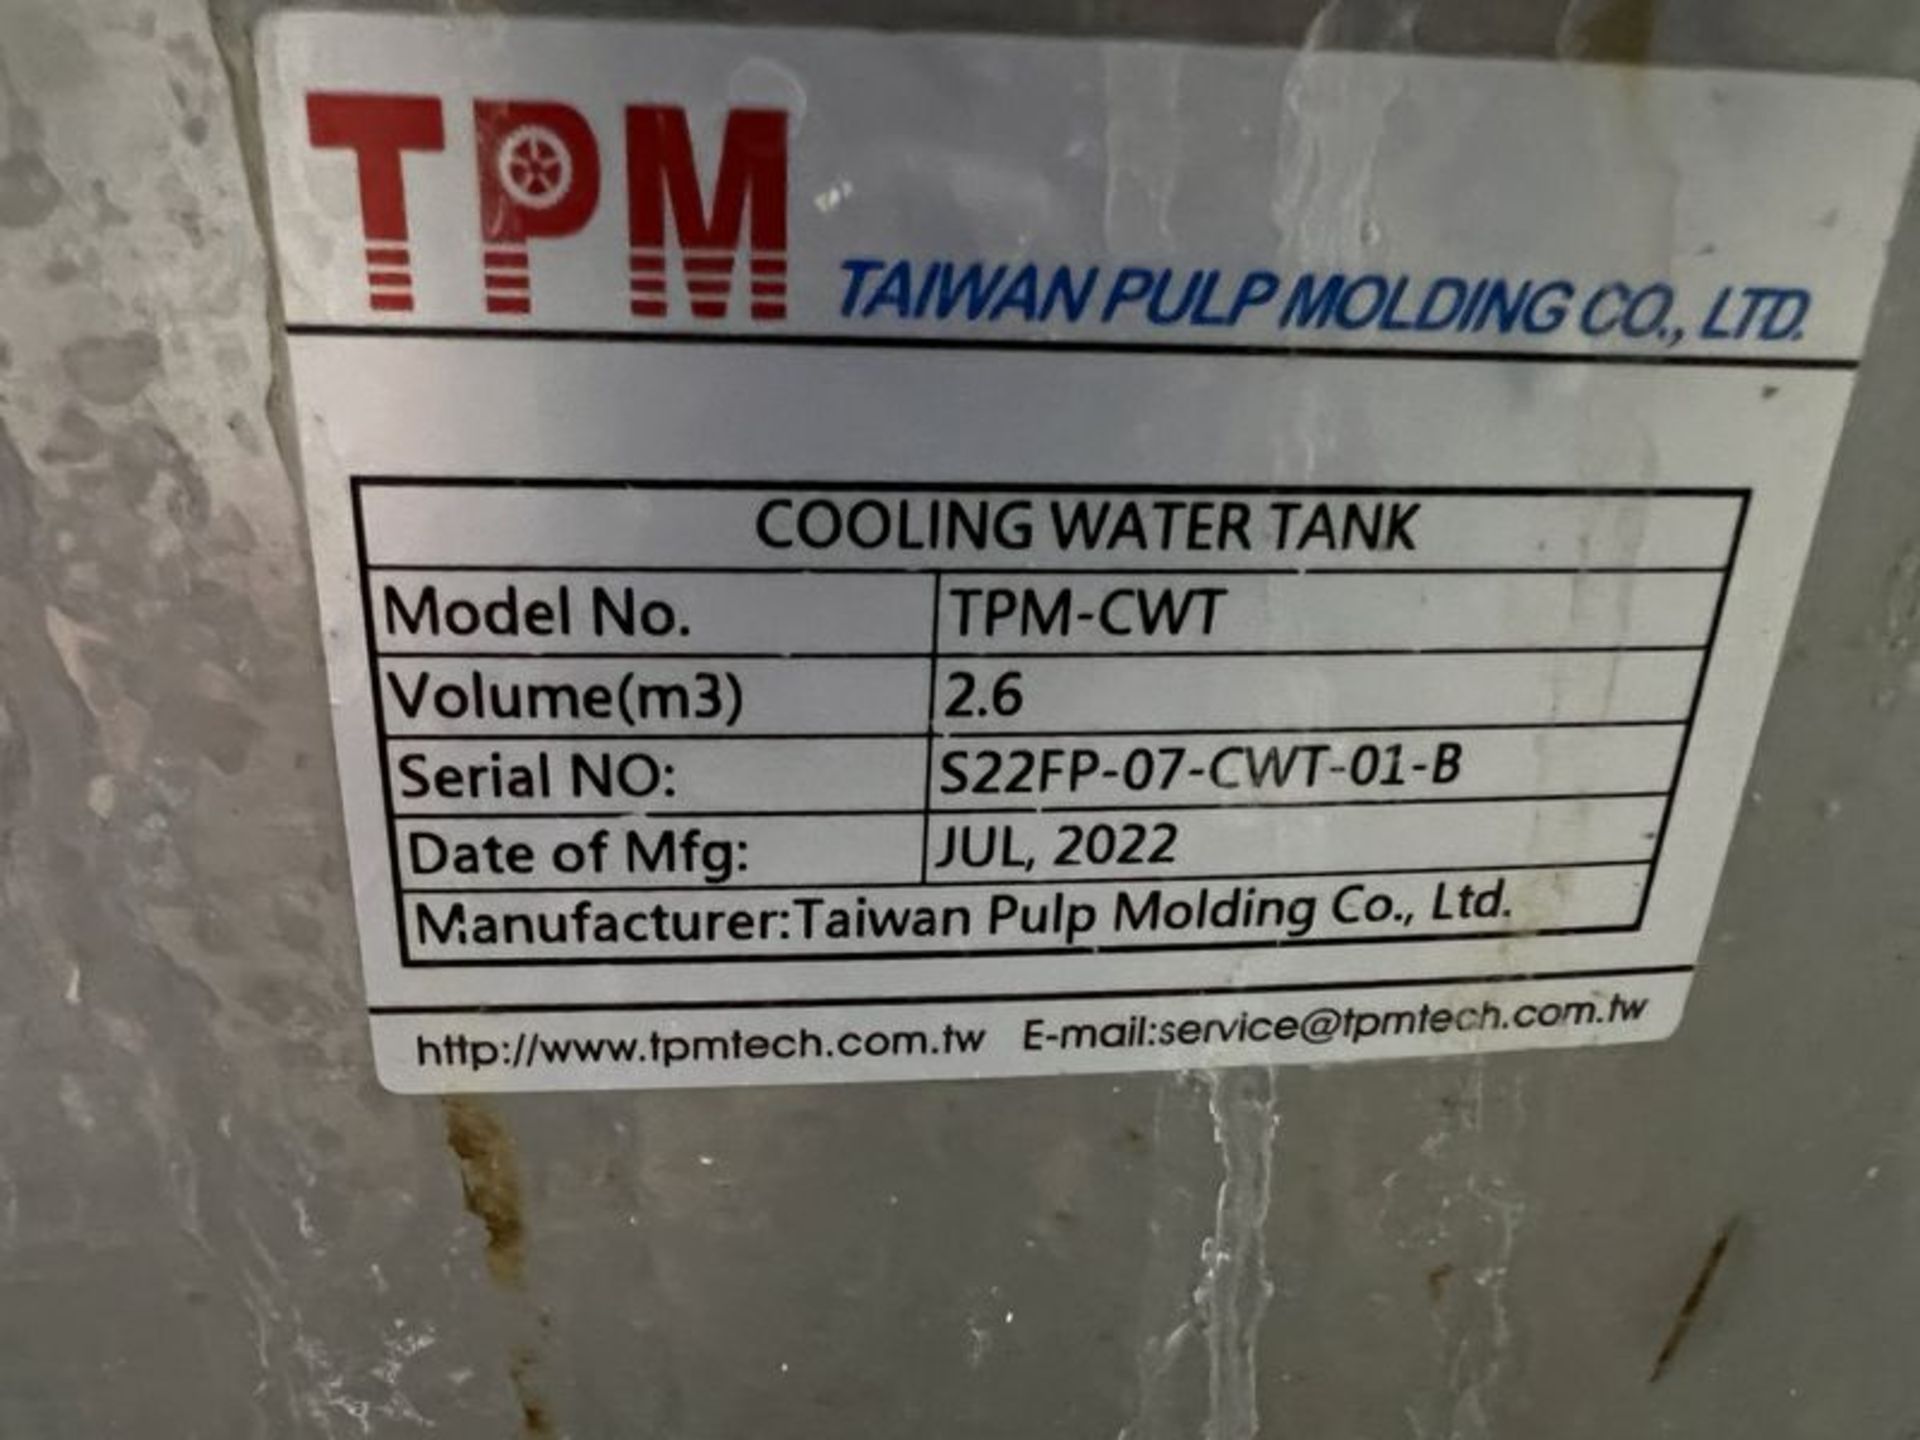 Taiwan Pulp Molding Co. Cooling Water Tank - Image 5 of 5